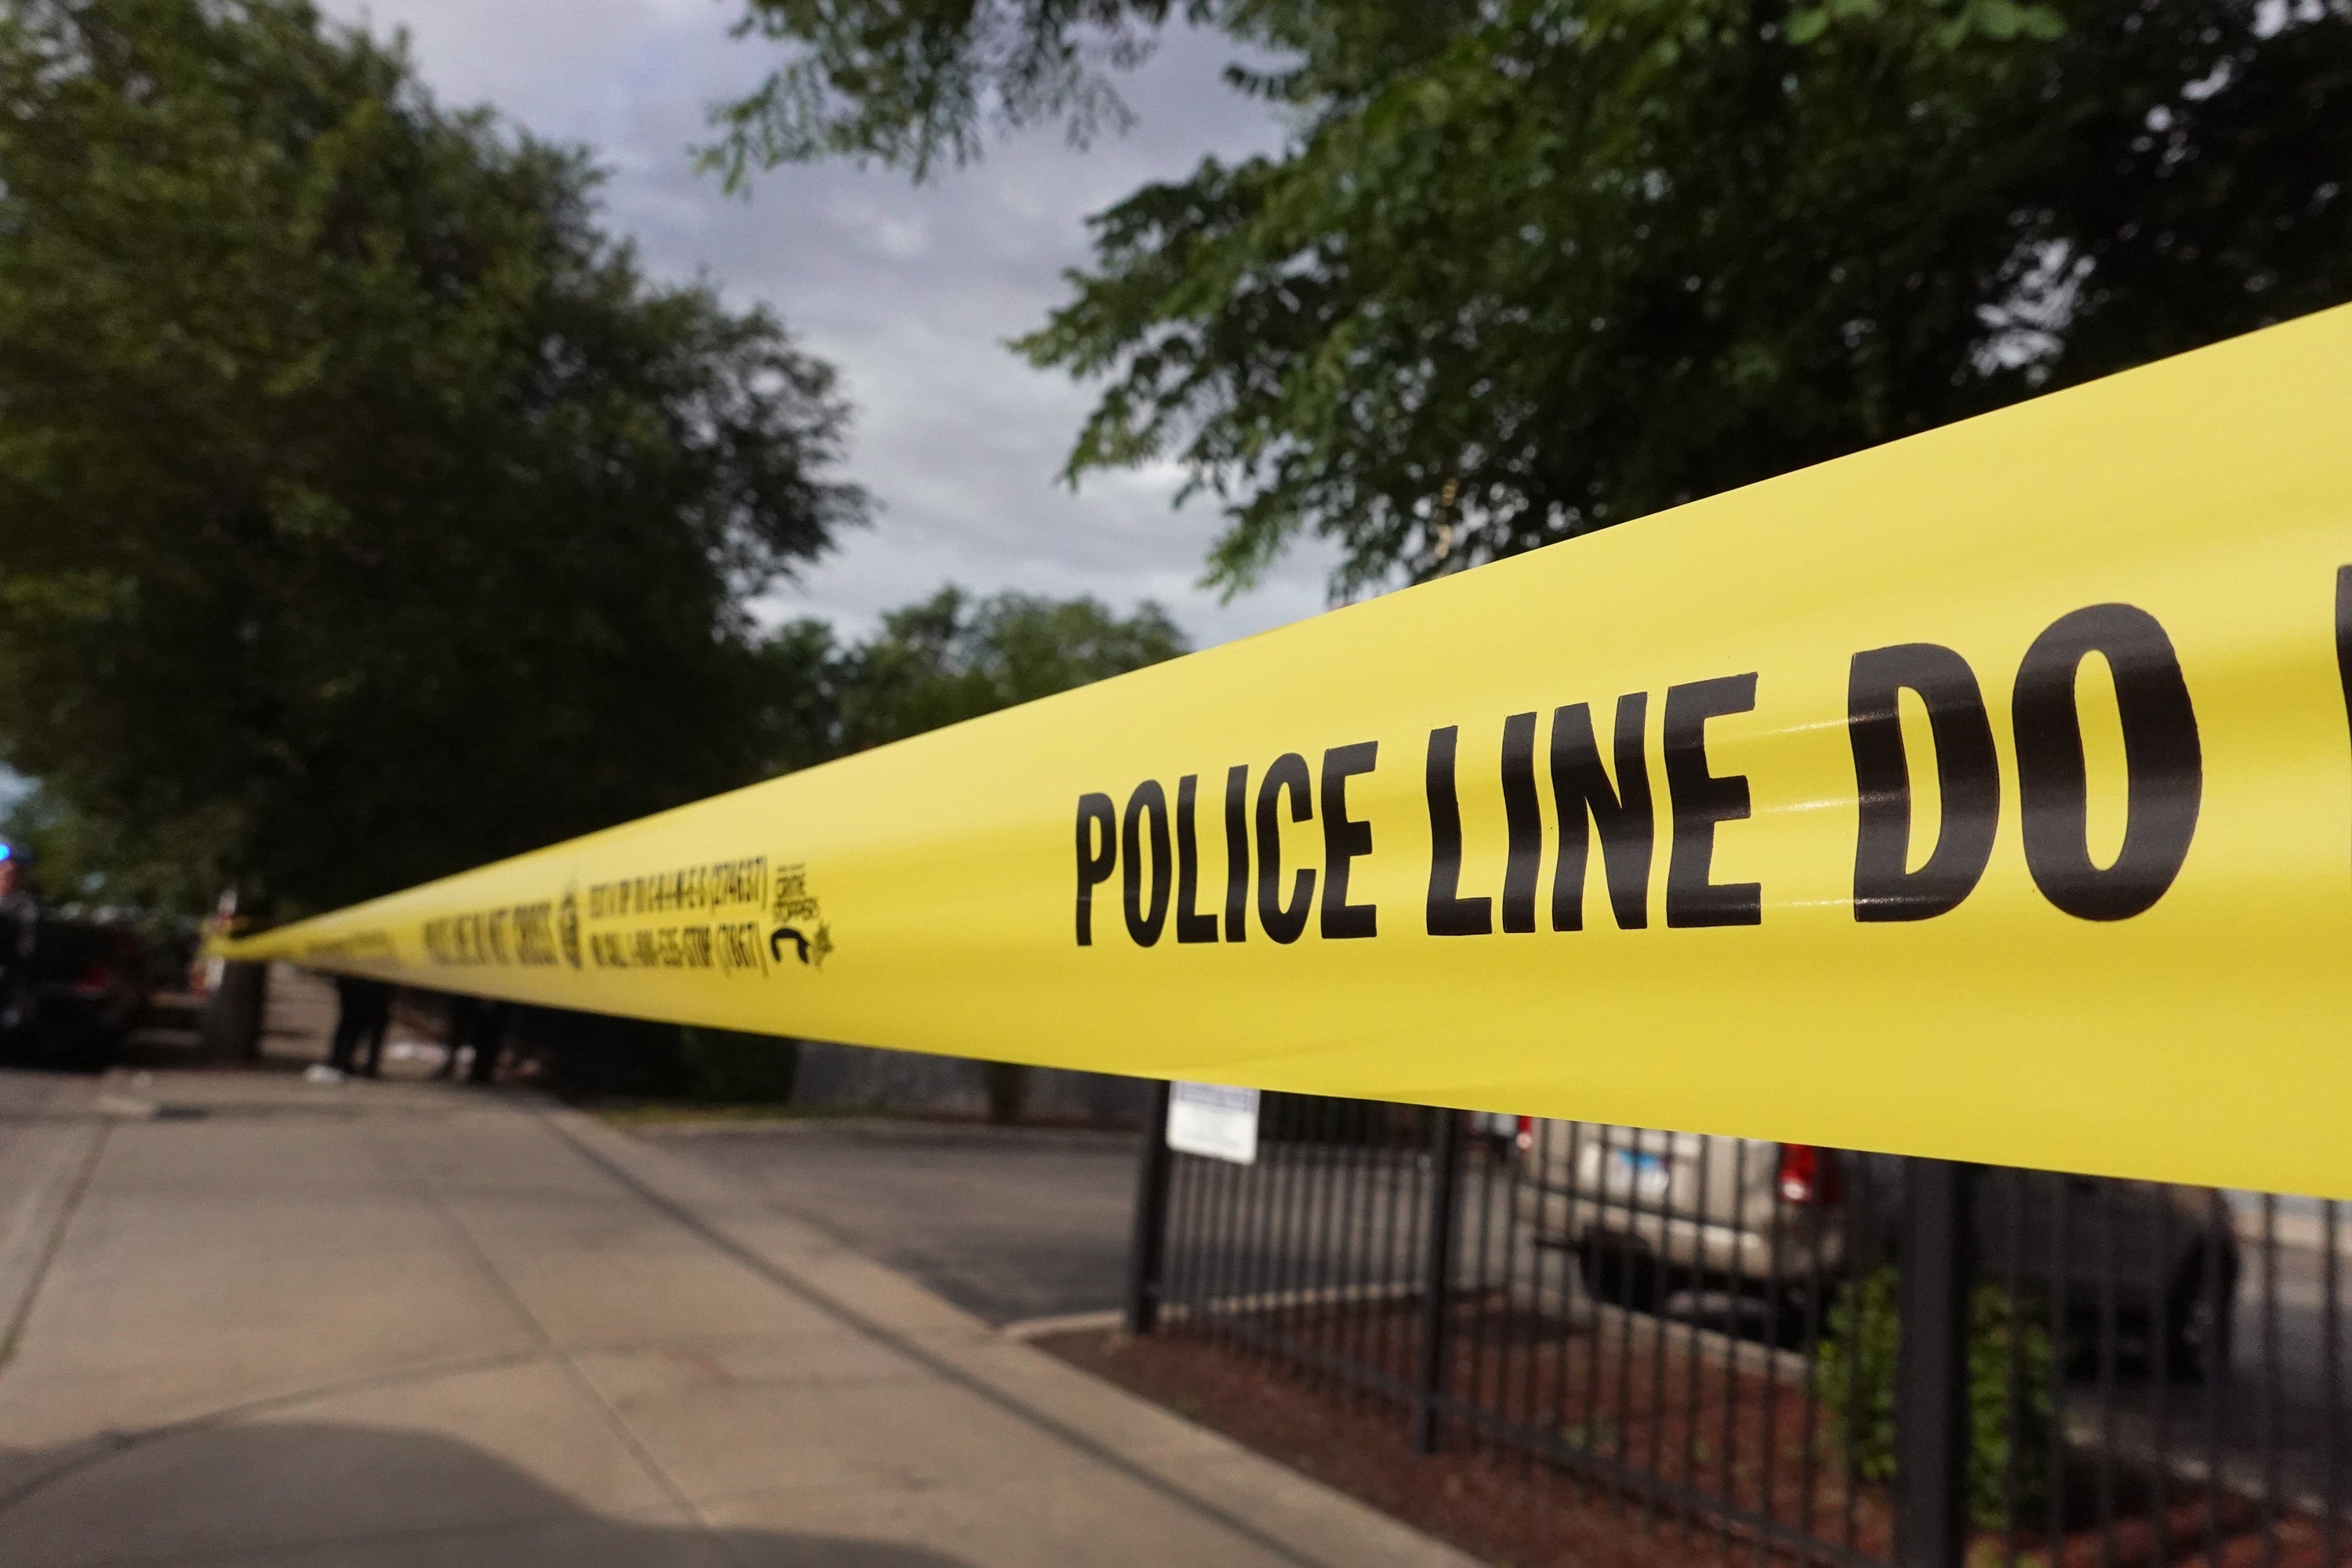 Police tape surrounds a crime scene where three people were shot at the Wentworth Gardens housing complex in the Bridgeport neighbourhood on 23 June, 2021 in Chicago, Illinois. Chicago saw a surge of shootings over the Fourth of July weekend